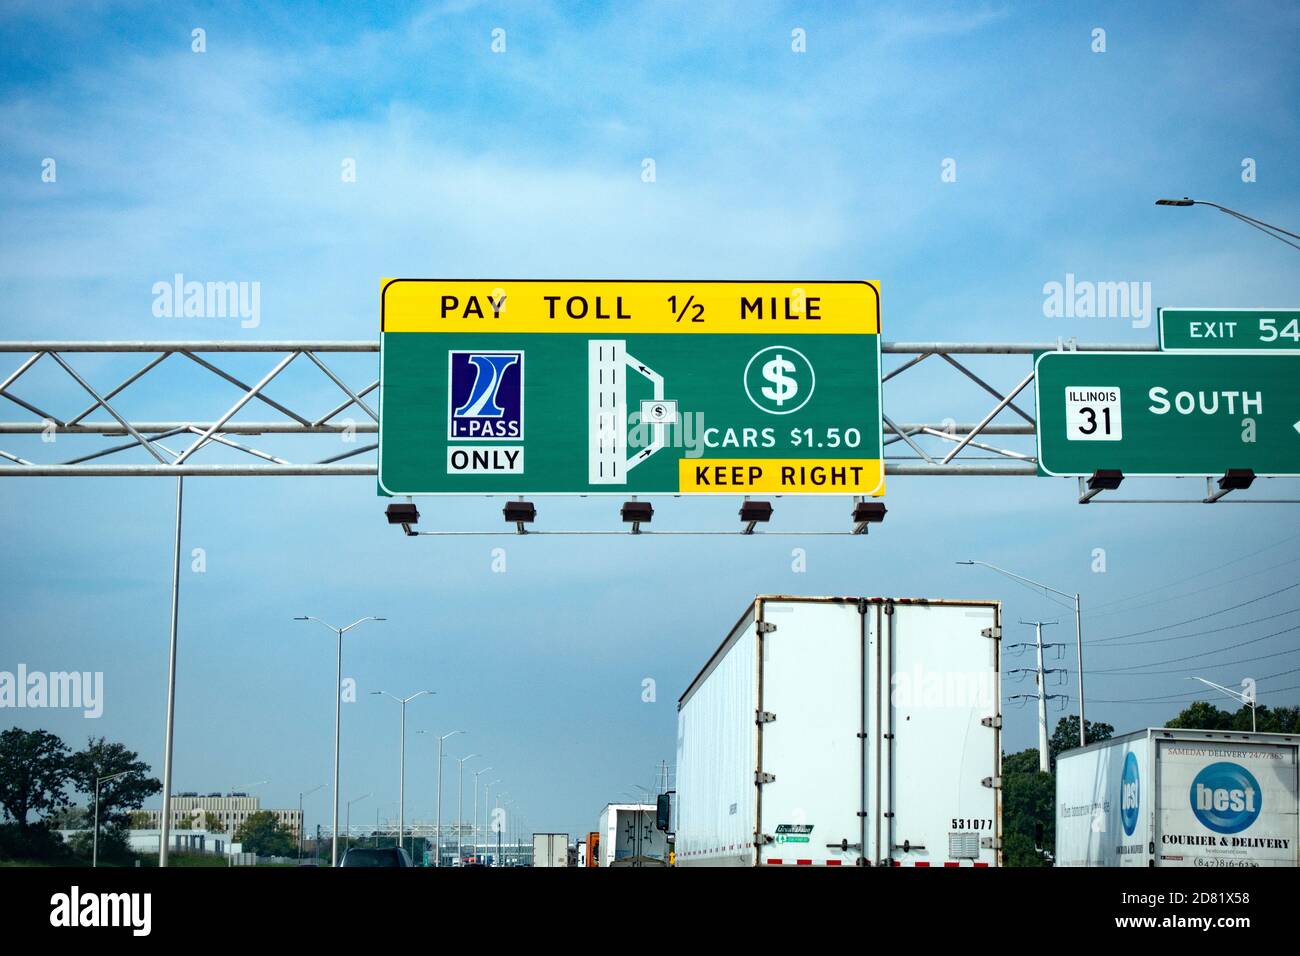 Overhead directional lane signs for the electronic and manual collection of tolls on the freeway. Chicago Illinois IL USA Stock Photo